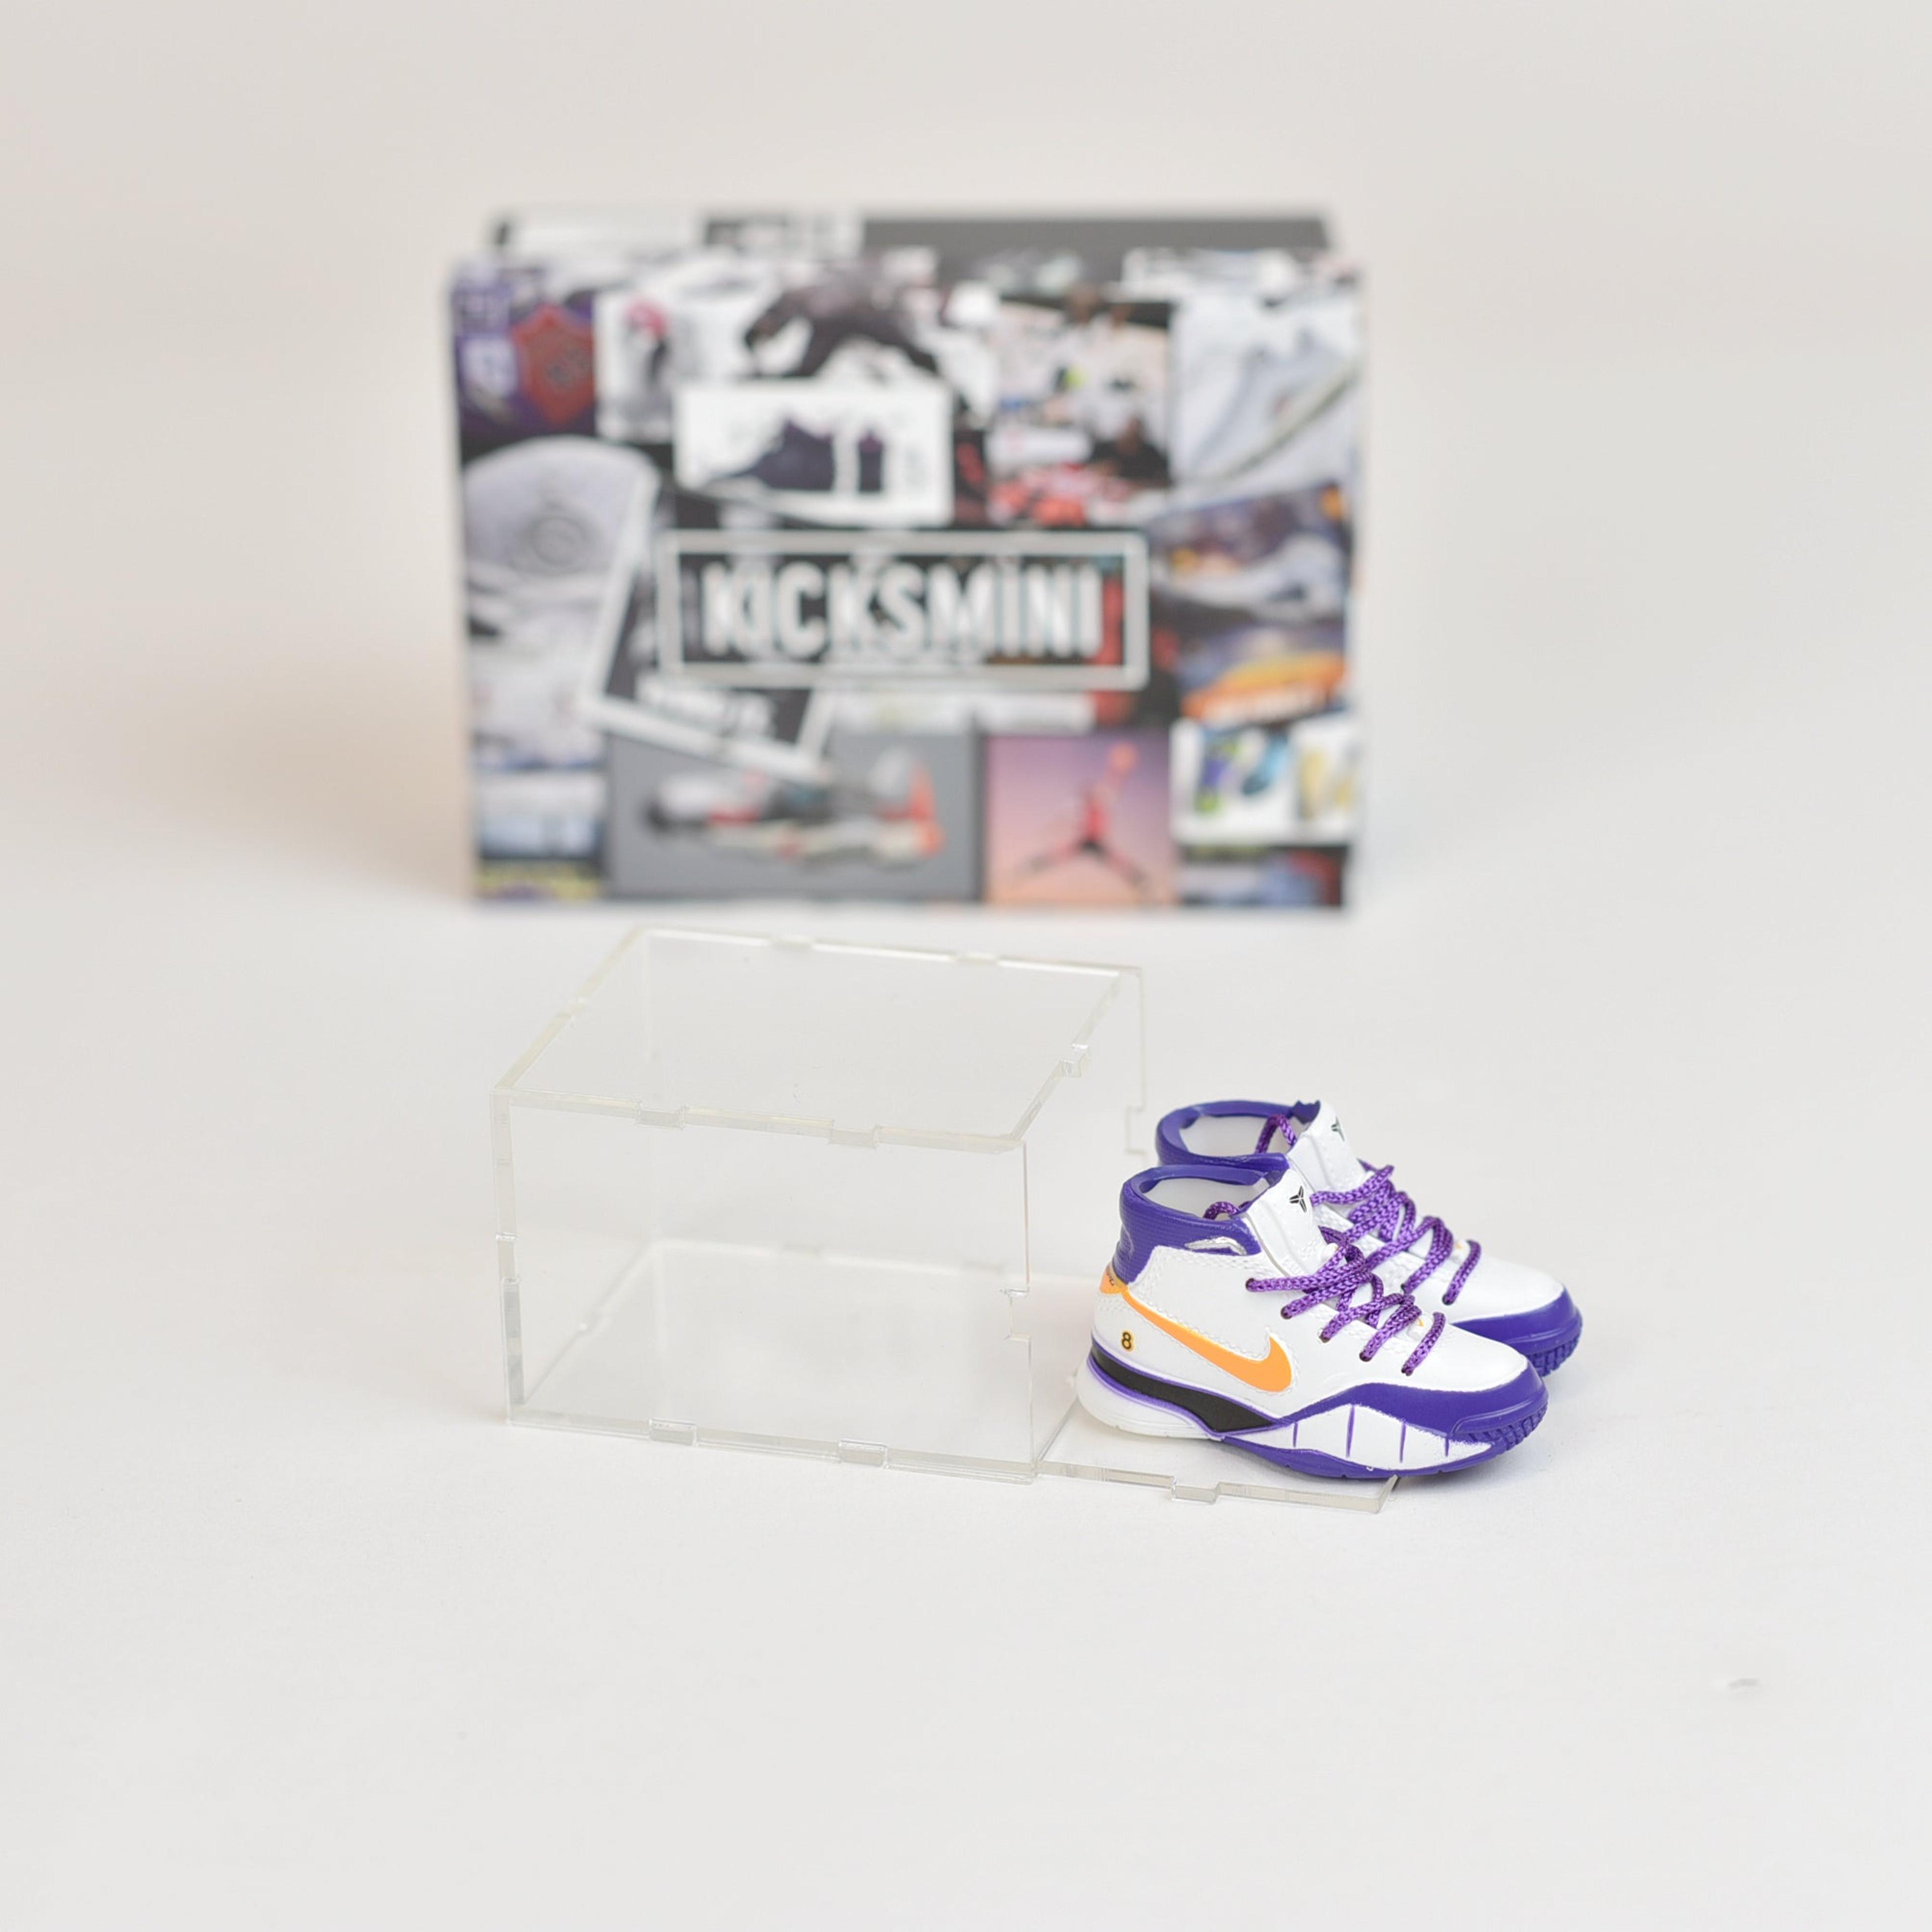 Alternate View 12 of Kobe Bryant/LeBron James/Steph Curry Mini Sneaker Collection wit